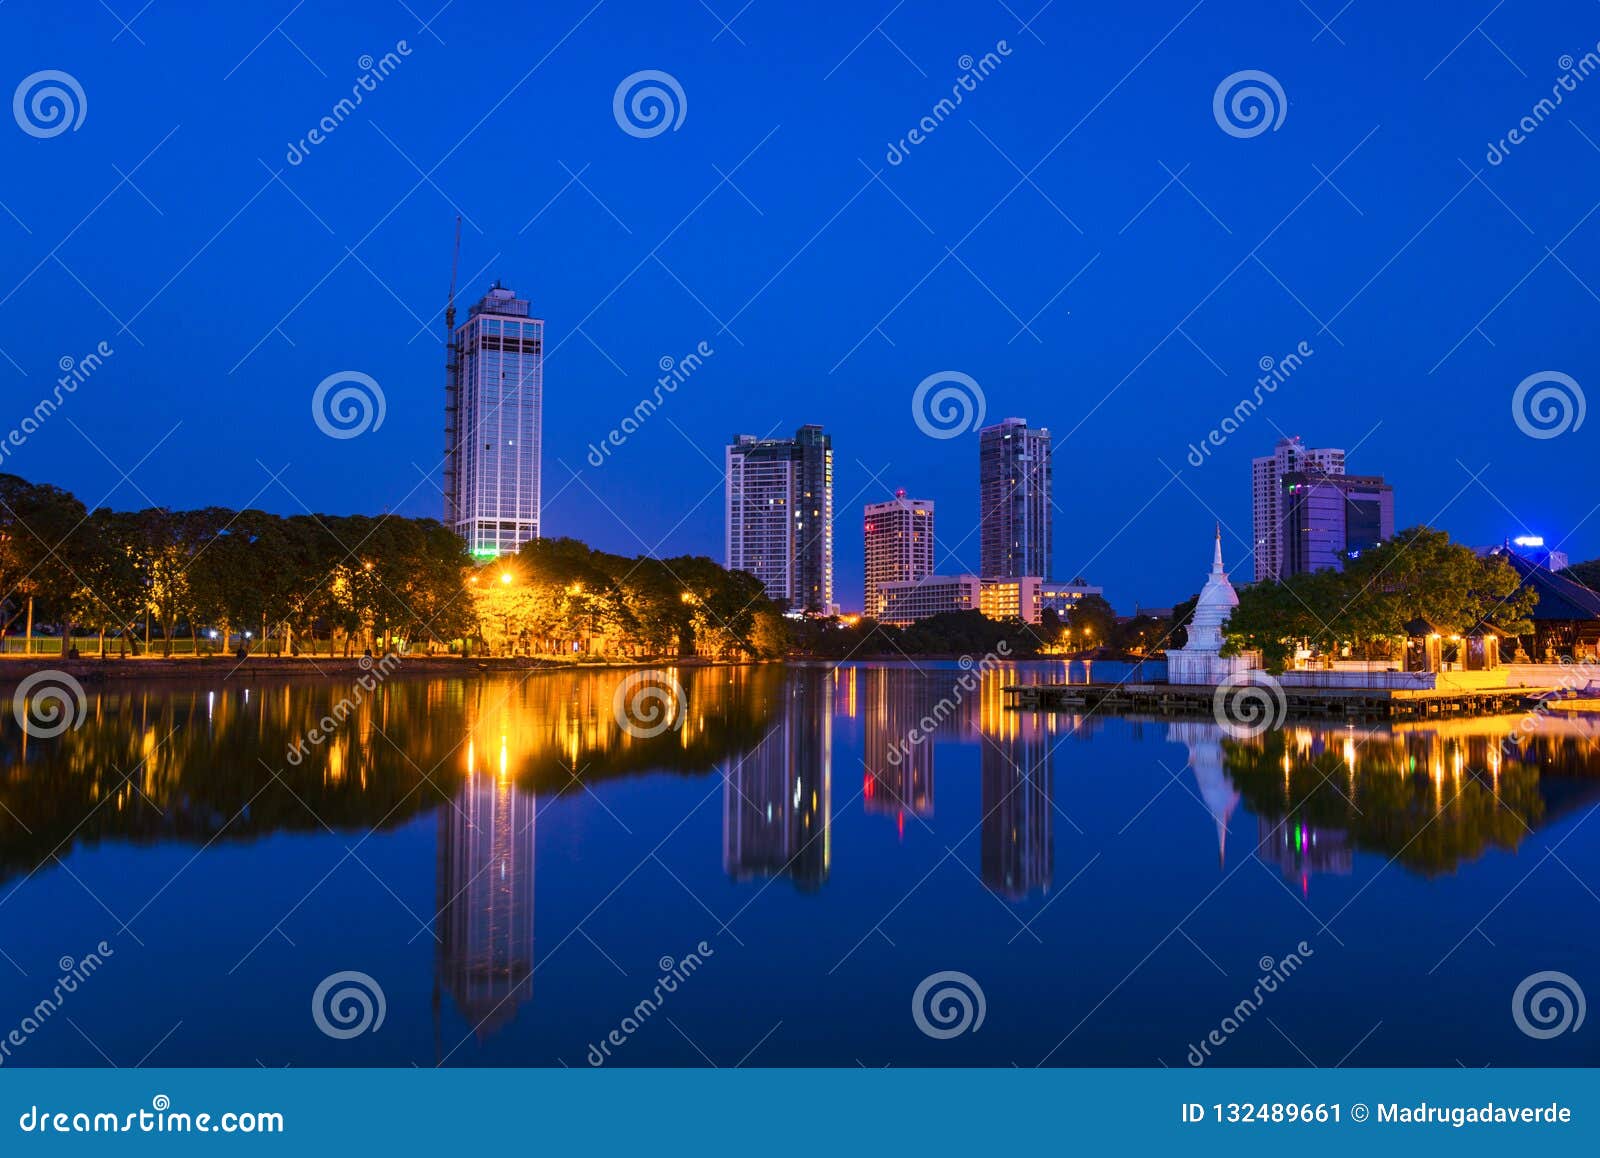 view of beira lake in colombo, sri lanka with buddhist temple